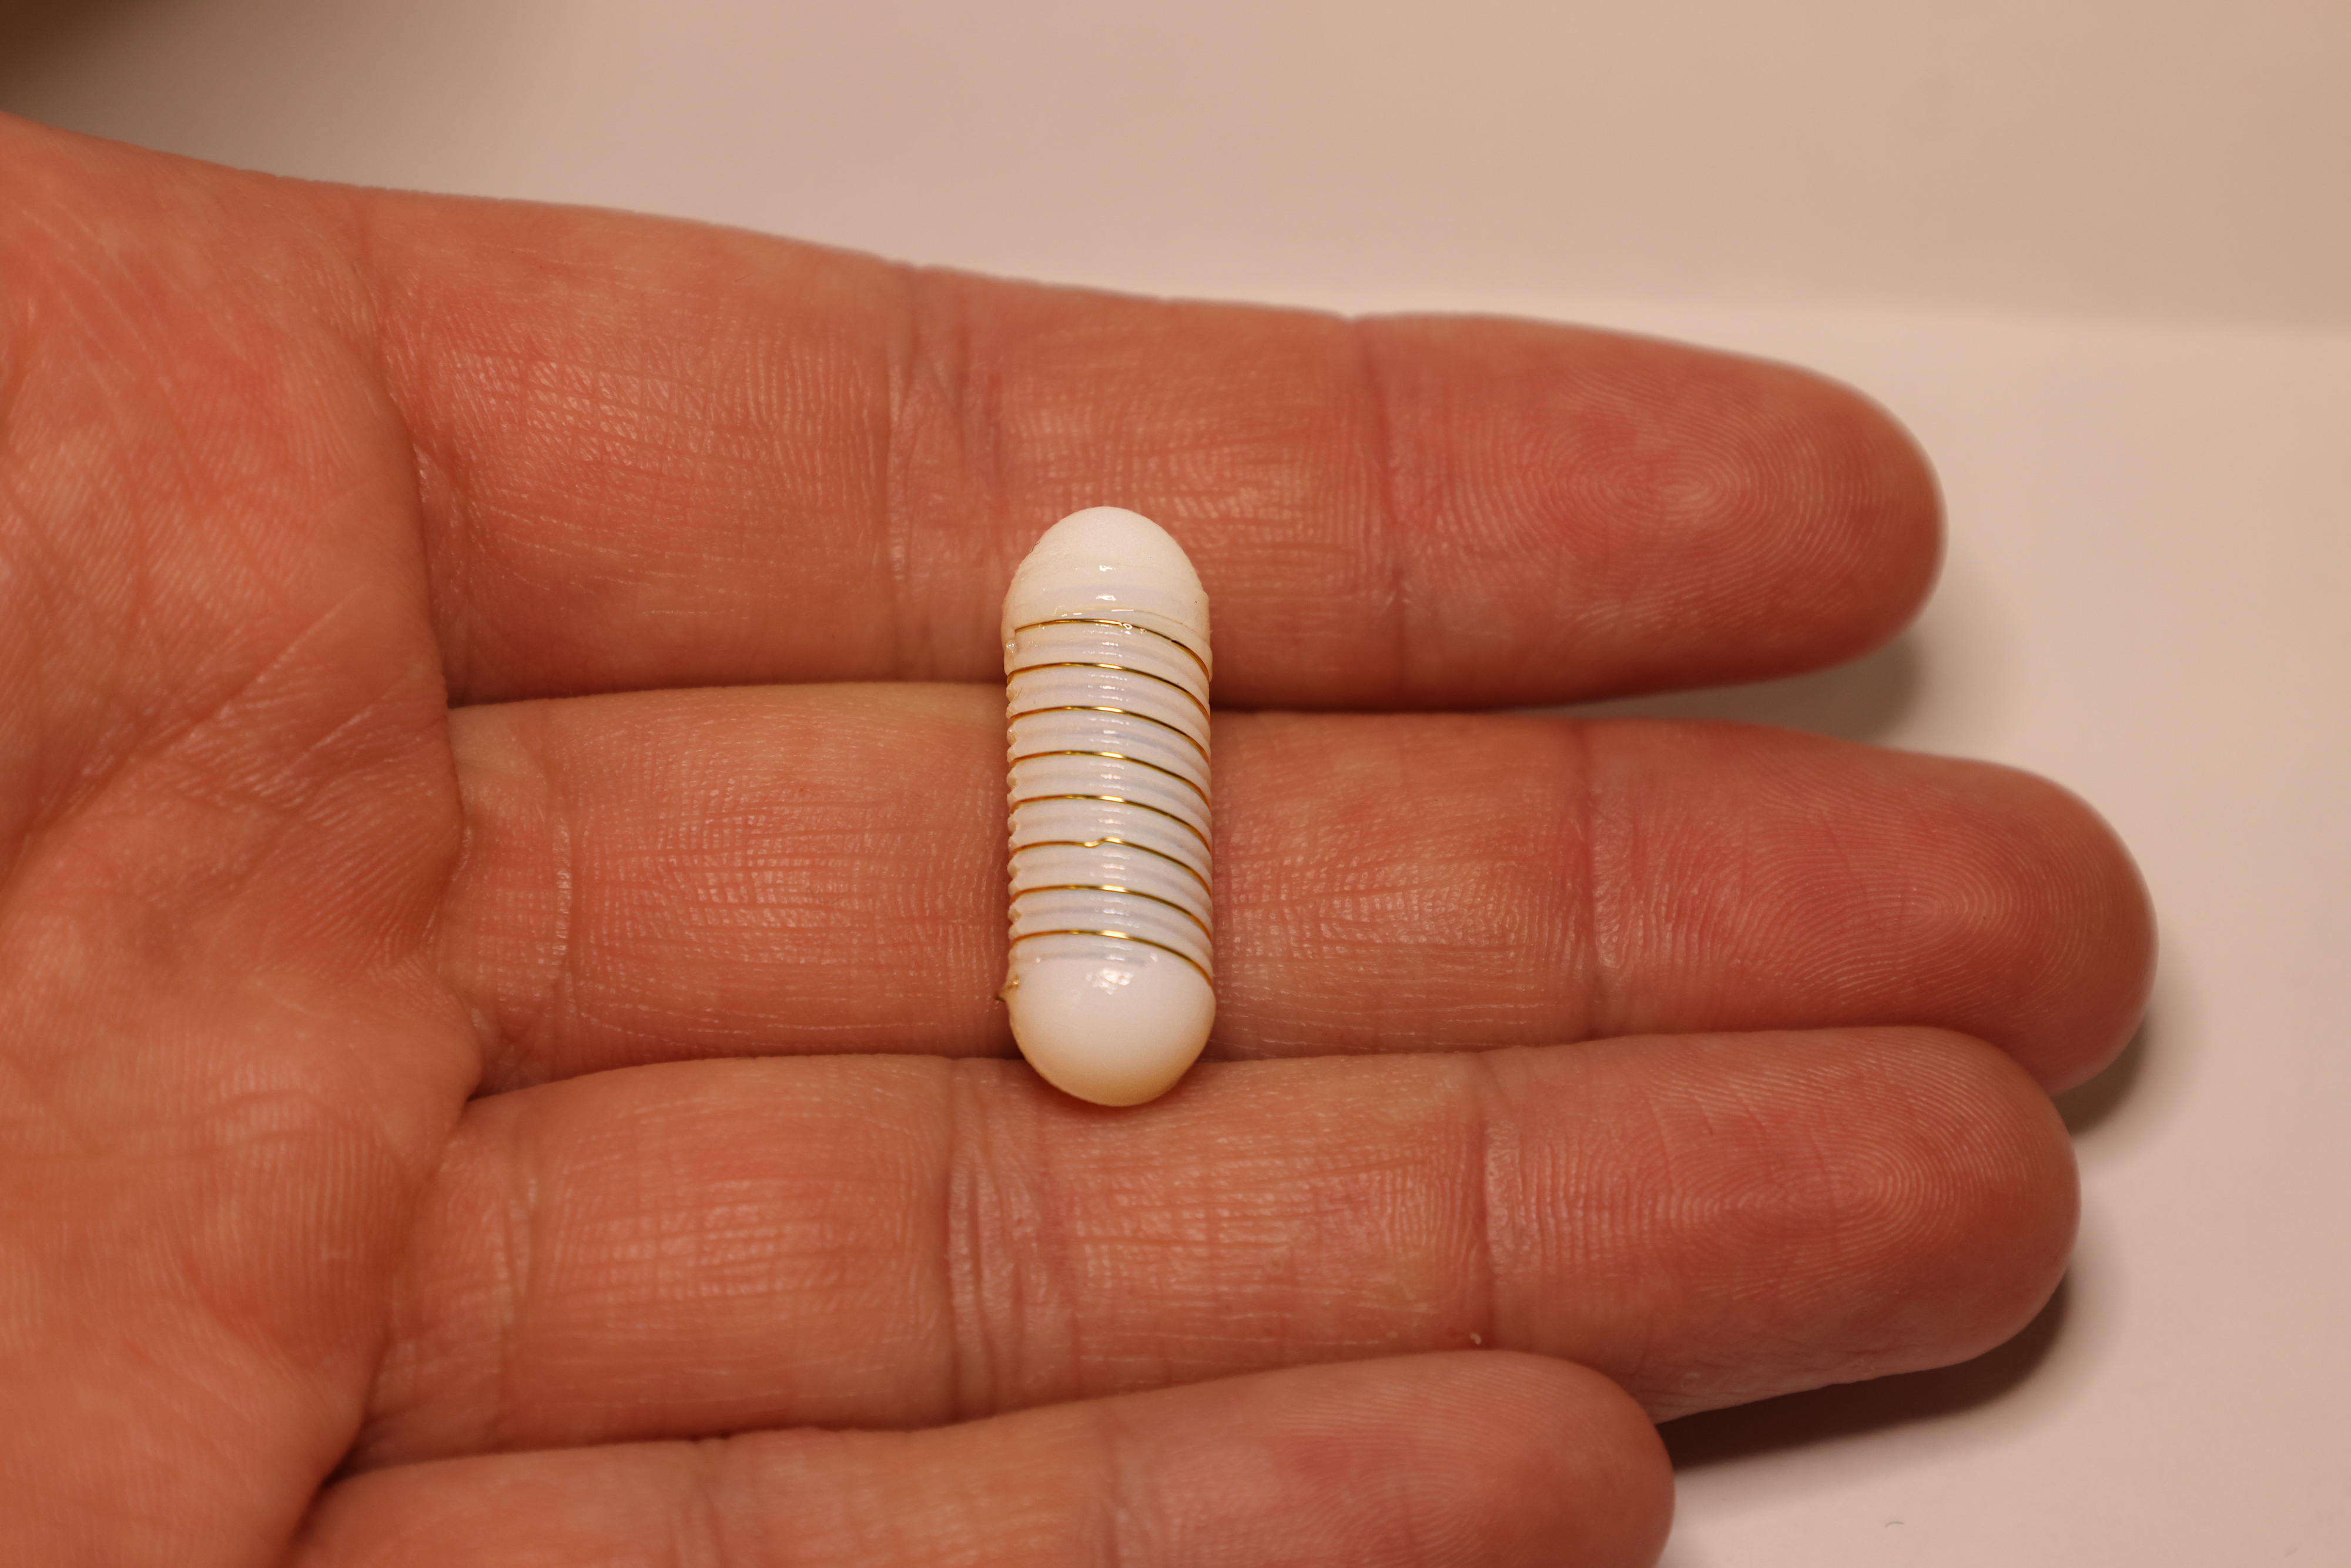 The ingestible “electroceutical” capsule stimulates hunger-regulating hormones. MIT News